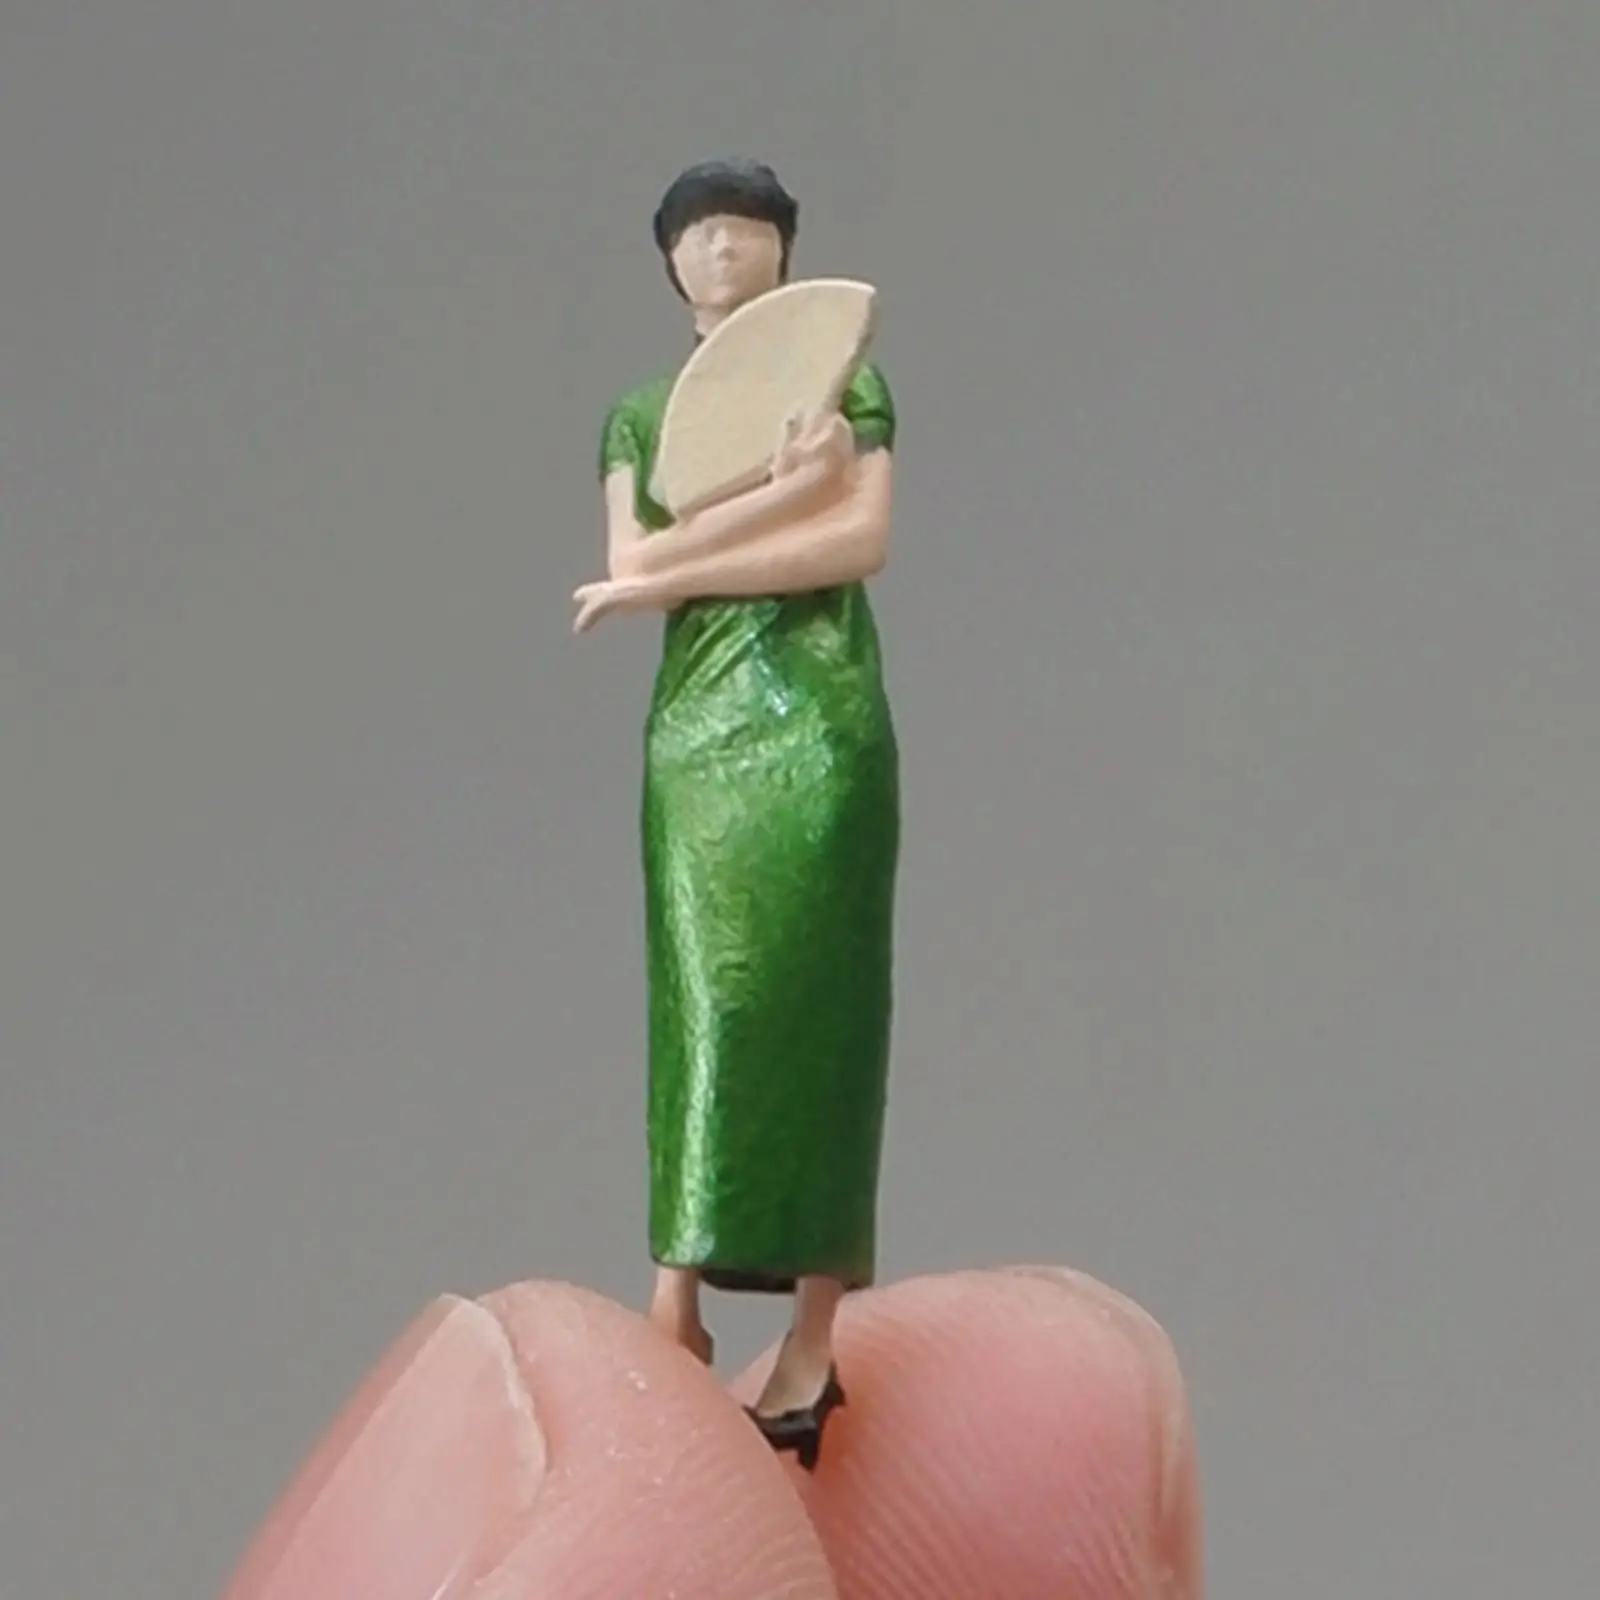 1/64 People Figure Chinese Cheongsam Girl Collectibles Miniature People Figurine for Photography Props Scenery Landscape Decor